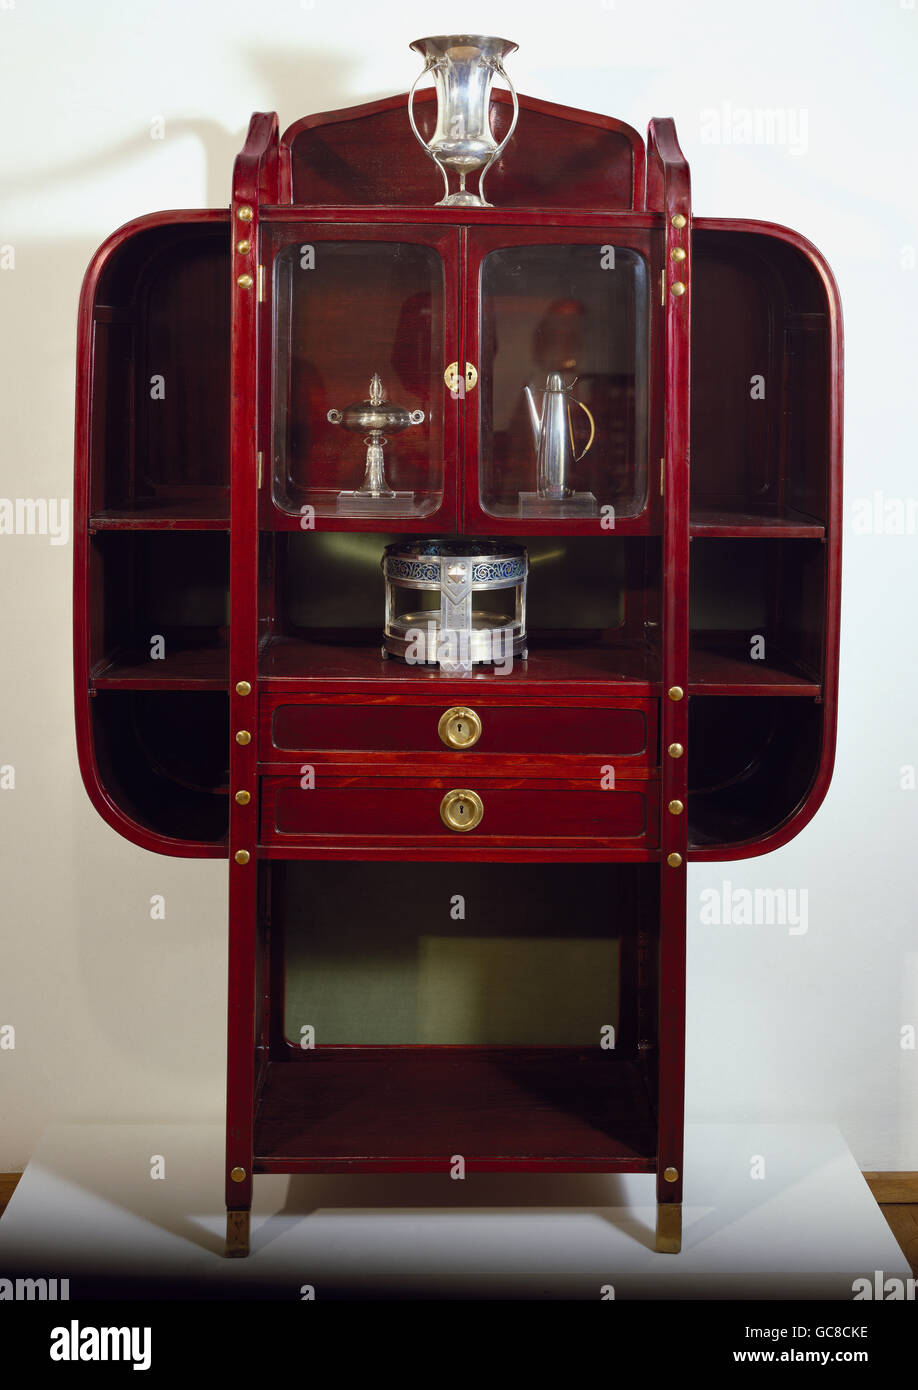 furnishing, furniture, Art Nouveau, display cabinet, by Kolo Moser (1868 - 1918), mahogany, 184.2 x 114.4 x 41.5 cm, circa 1904, Additional-Rights-Clearences-Not Available Stock Photo